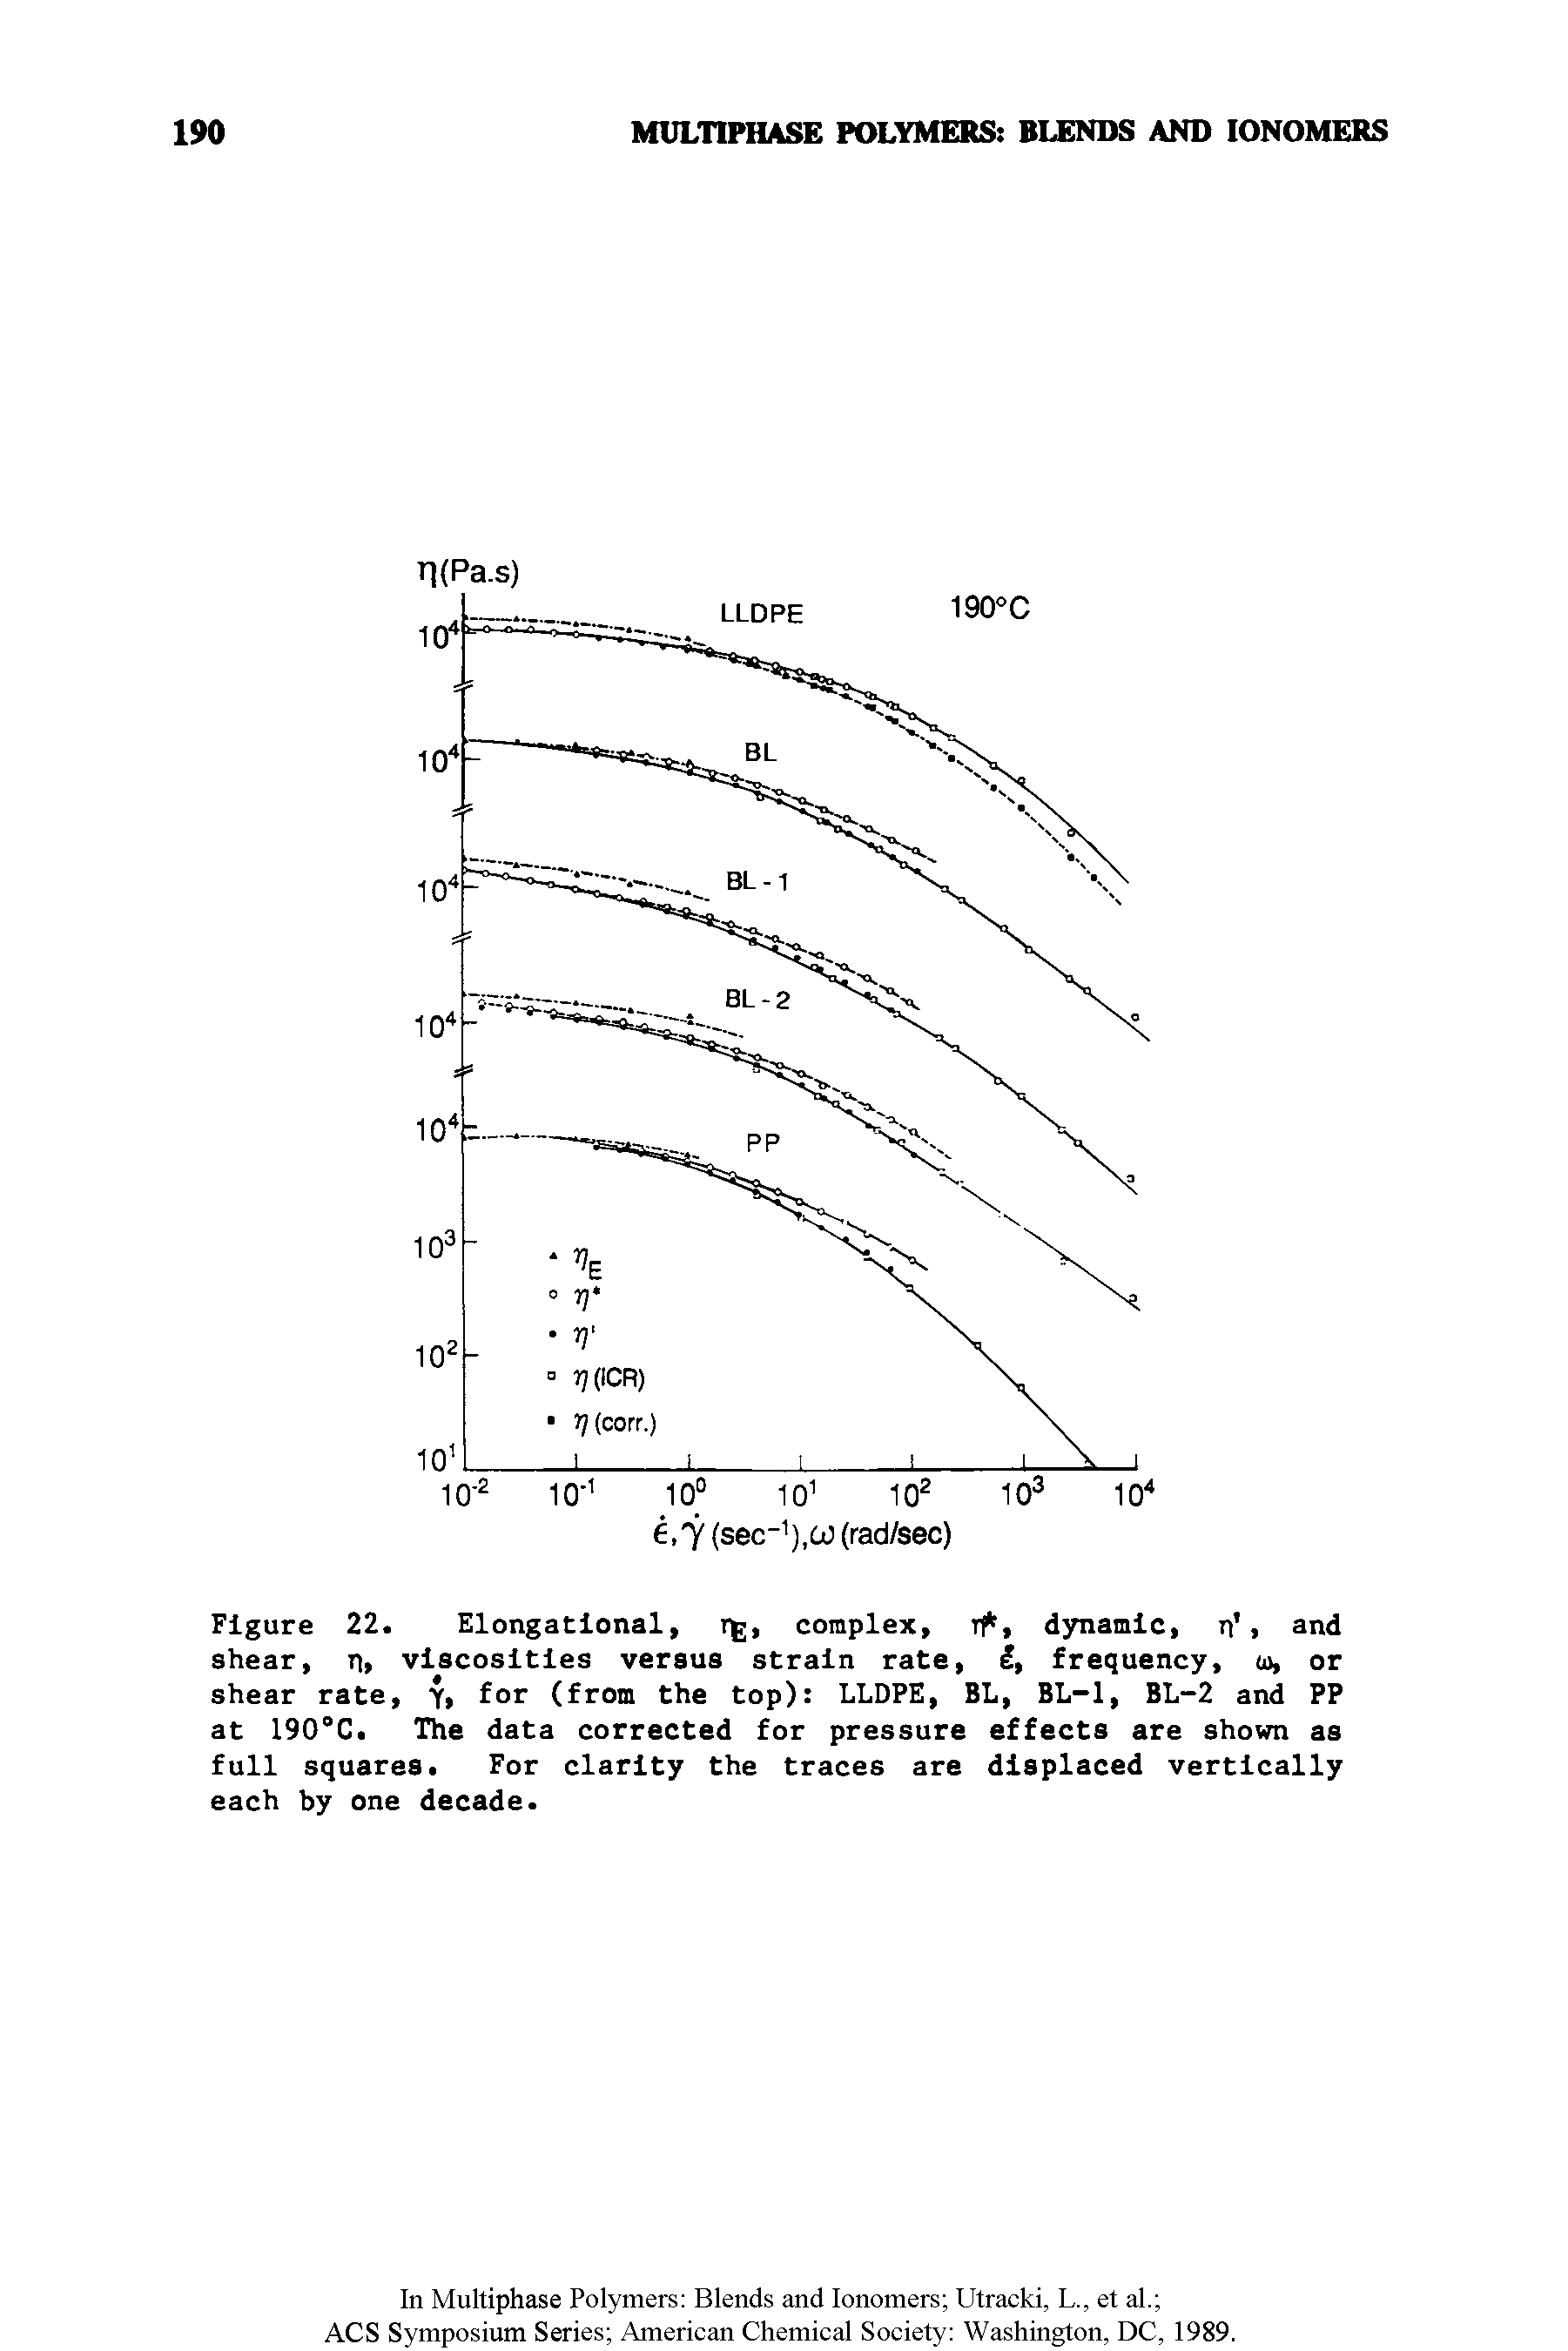 Figure 22. Elongatlonal, rg, complex, rf, dynamic, n, and shear, n viscosities versus strain rate, frequency, to, or shear rate, y, for (from the top) LLDPE, BL, BL-1, BL-2 and PP at 190°C. The data corrected for pressure effects are shown as full squares. For clarity the traces are displaced vertically each by one decade.